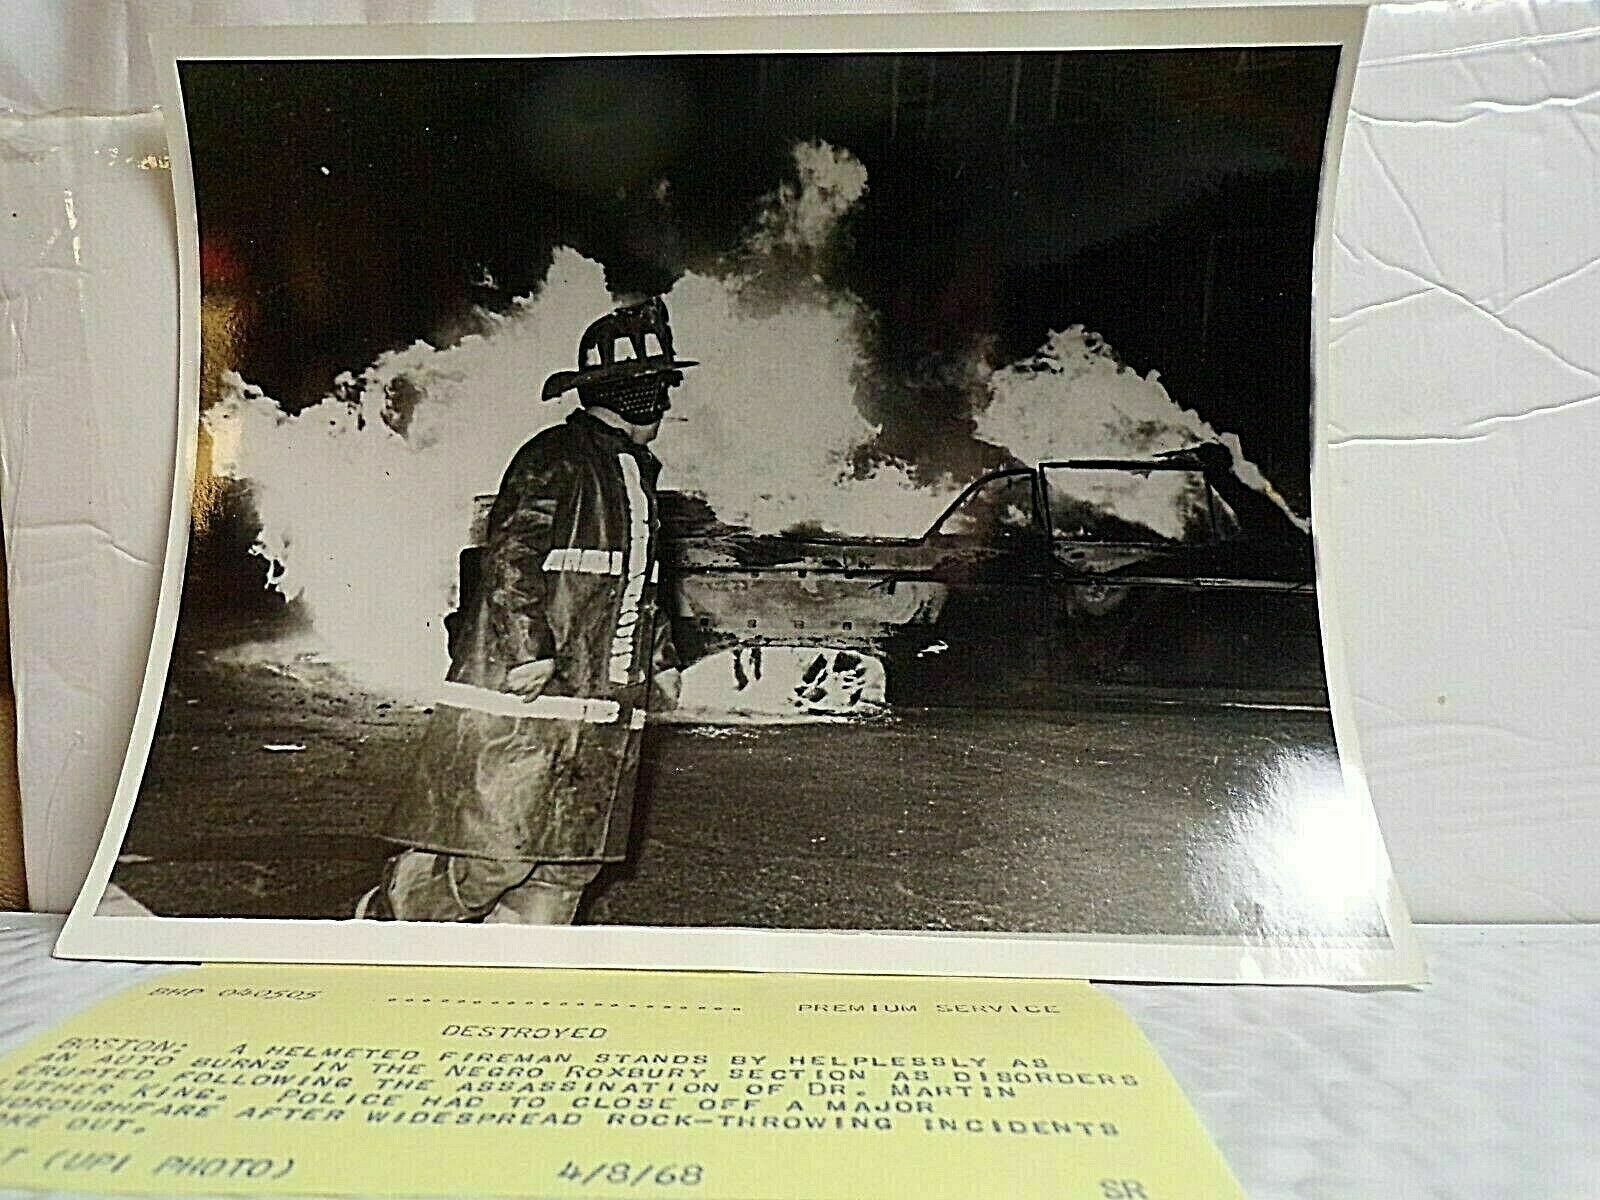 1968 MARTIN LUTHER KING JR PHOTO FIRE CARS  DEATH FANTASTIC AFRICAN AMERICAN